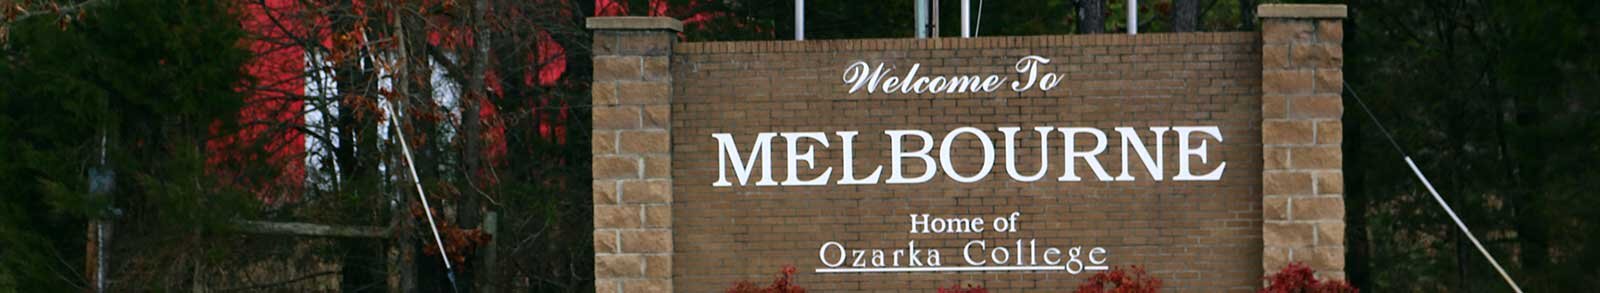 Welcome to Melbourne sign